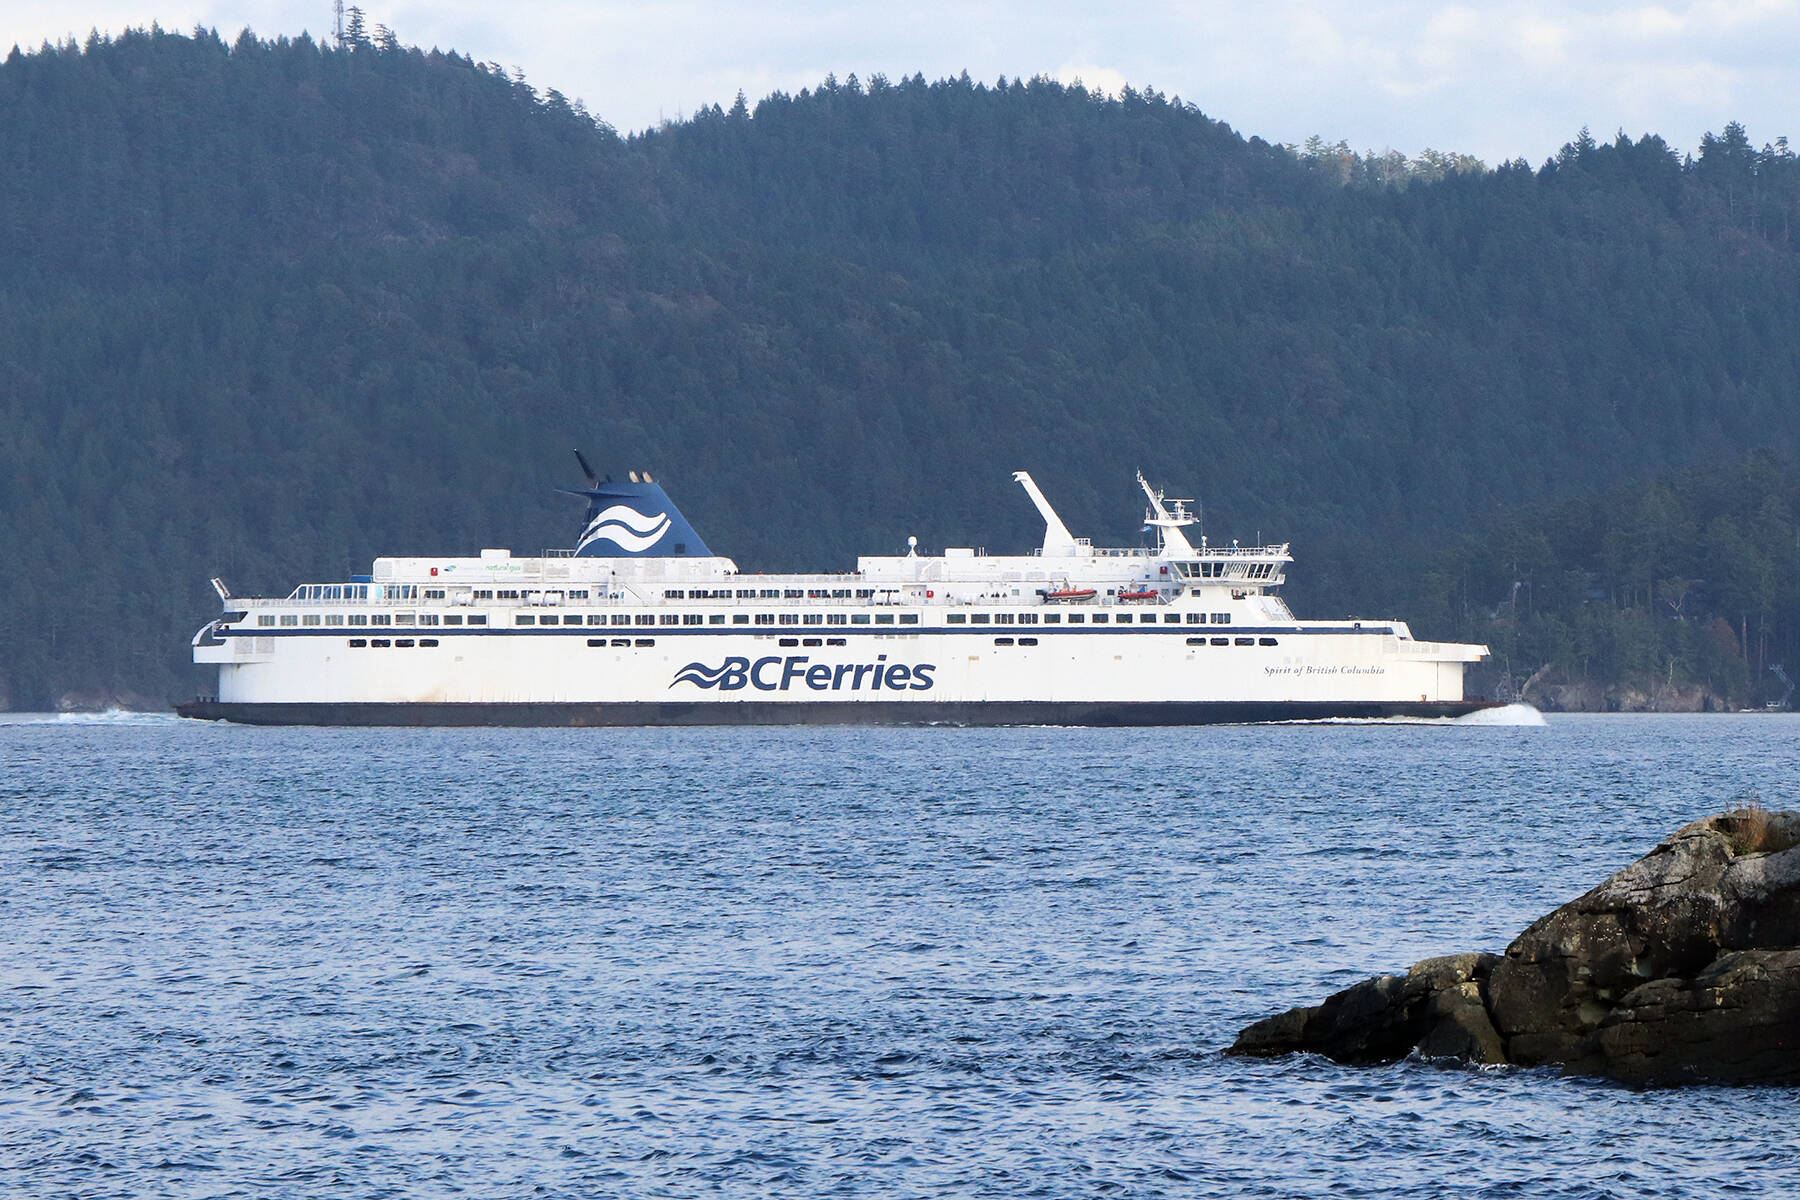 Sidney/North Saanich RCMP arrested three men for refusing to wear masks and getting aggressive with others on a BC Ferries sailing bound for Swartz Bay on Sept. 24. (Don Descoteau/News Staff)